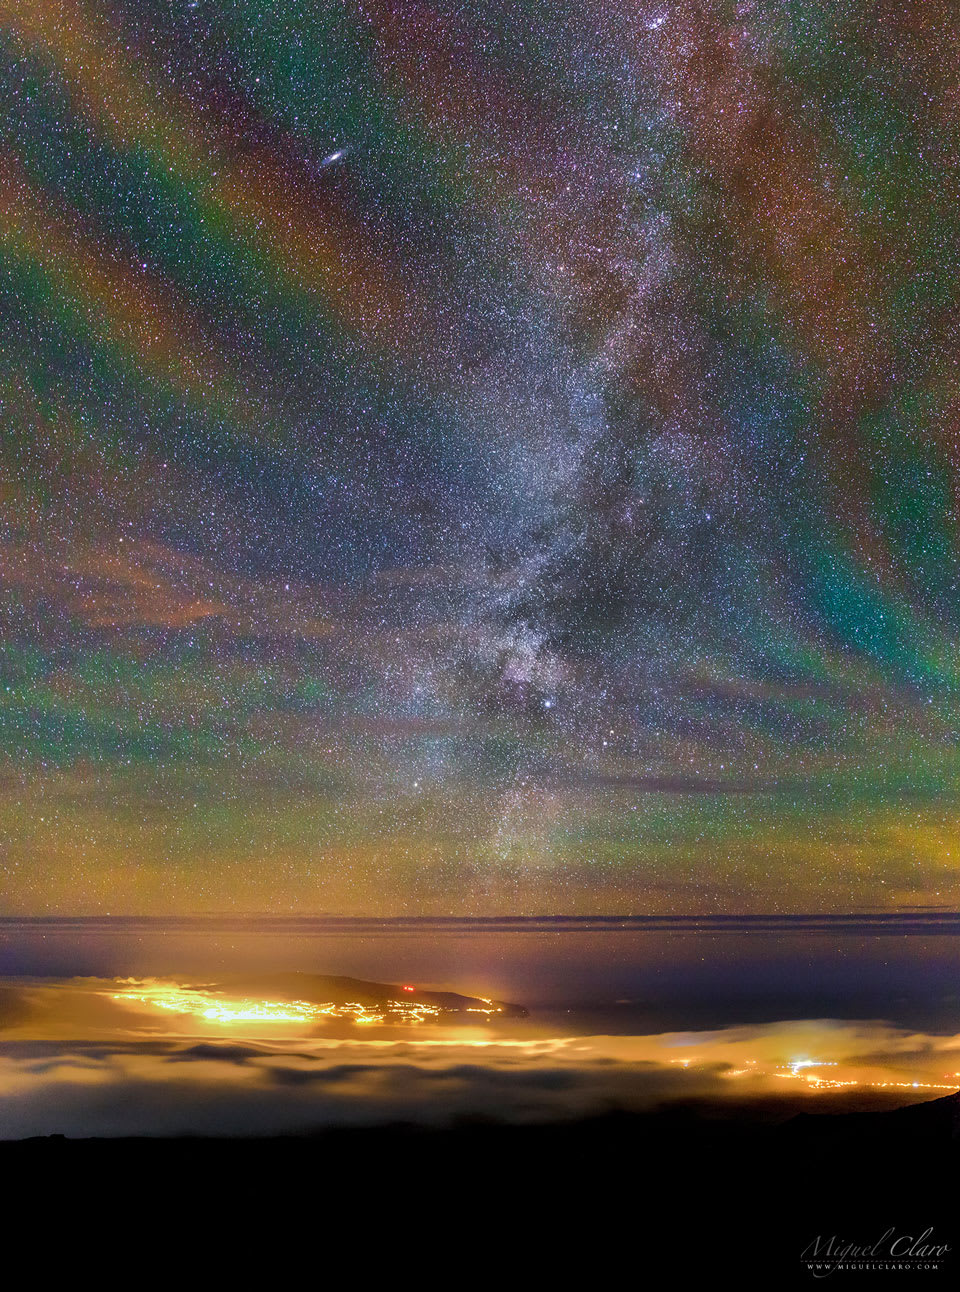 APOD: 2021 April 18 - Rainbow Airglow over the Azores